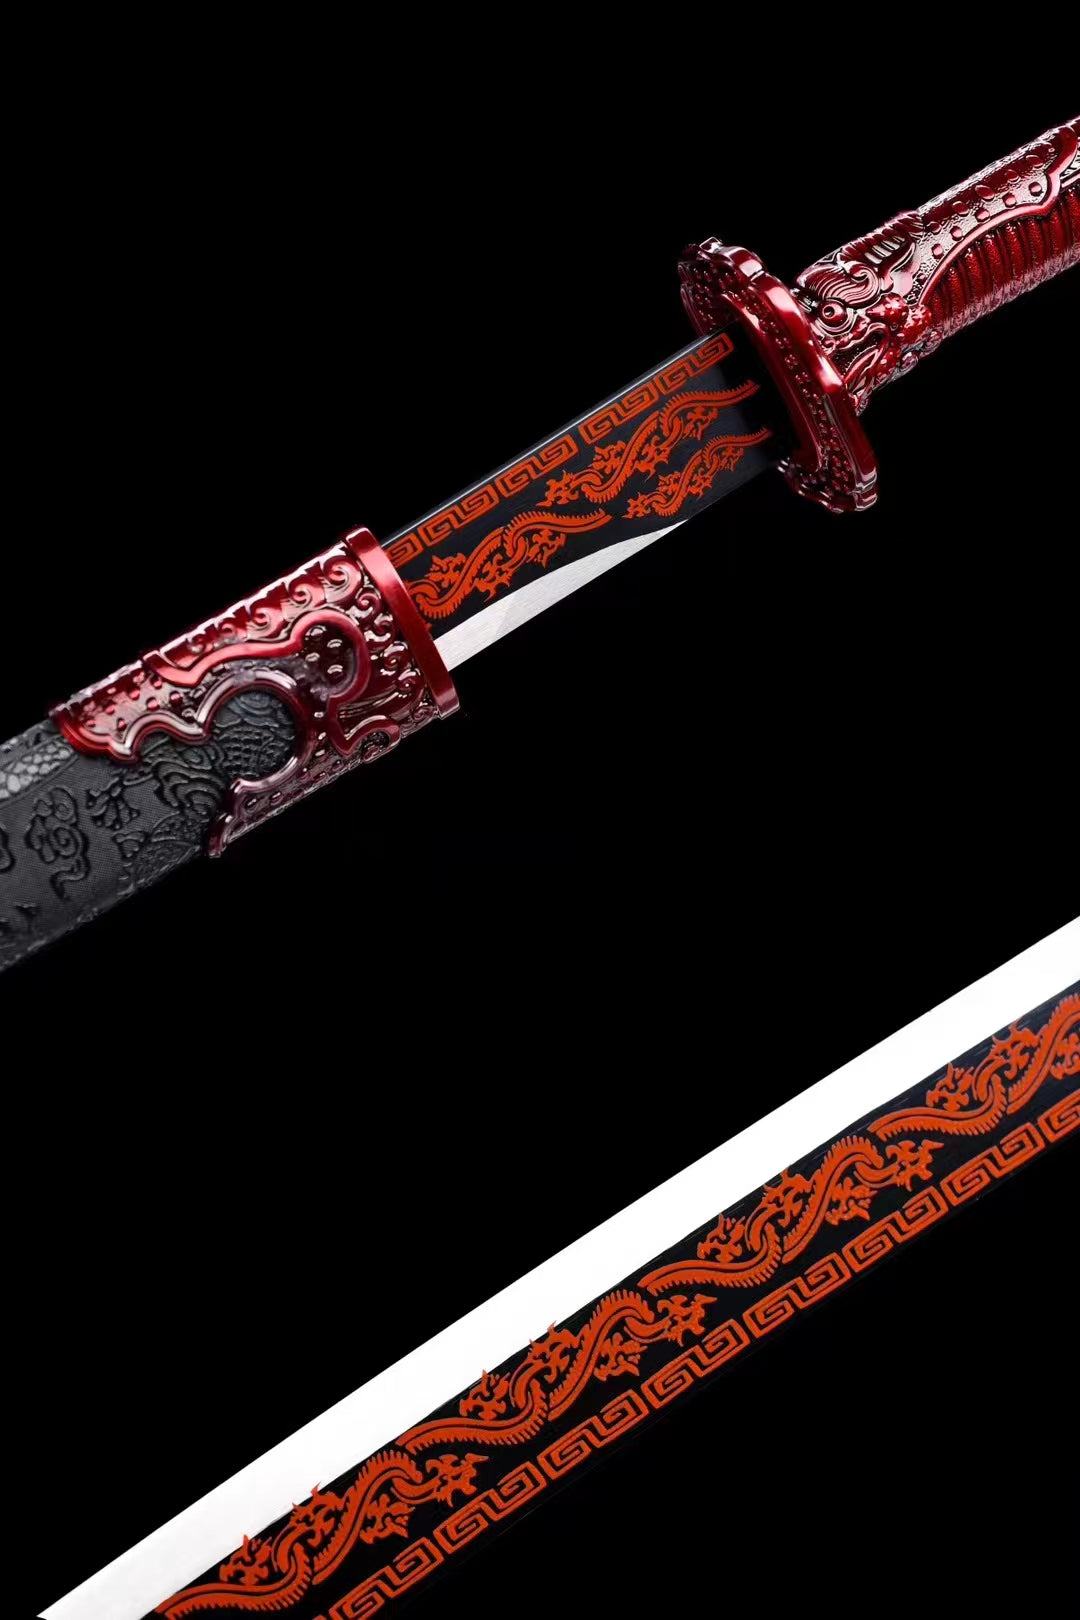 Forged from manganese steel, black and red high temperature paint绣春刀-赤血